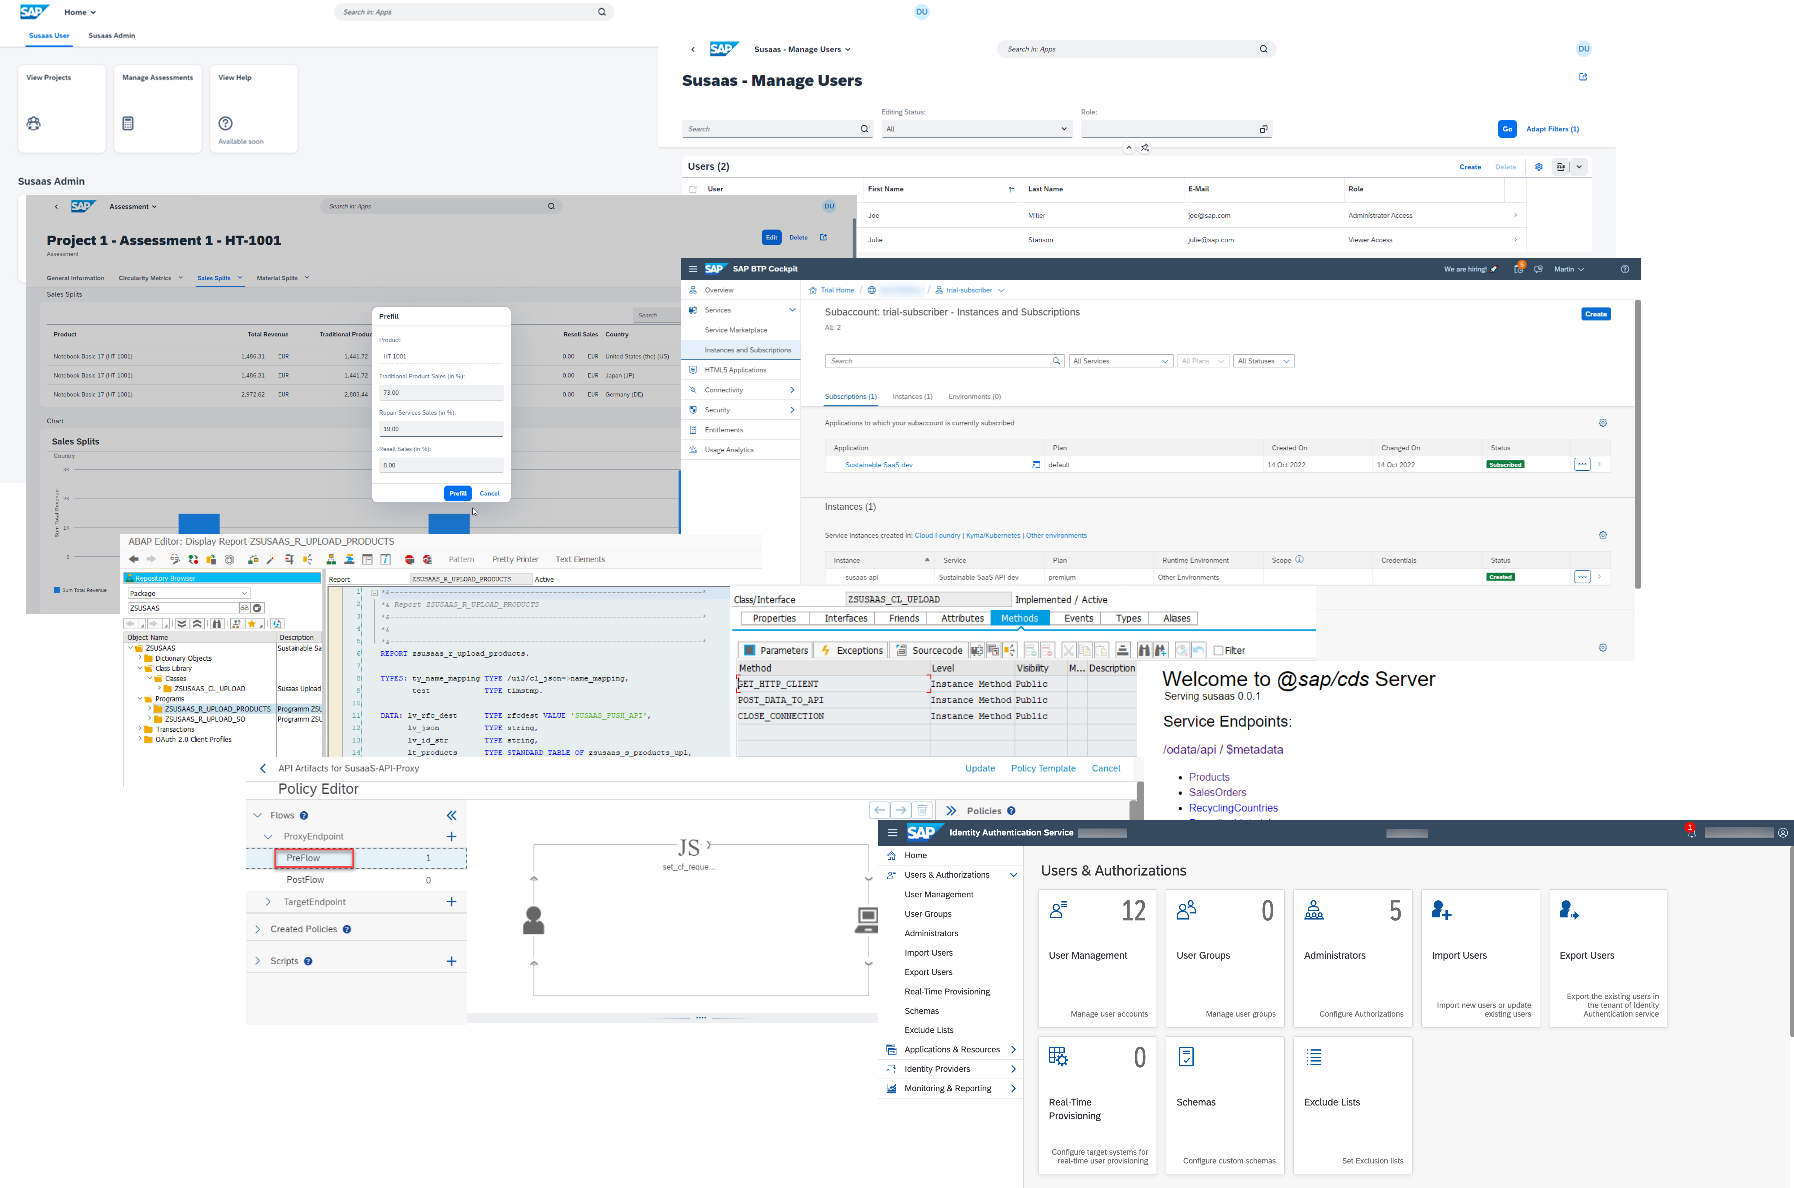 A screenshot showing multiple screens of the sample application.